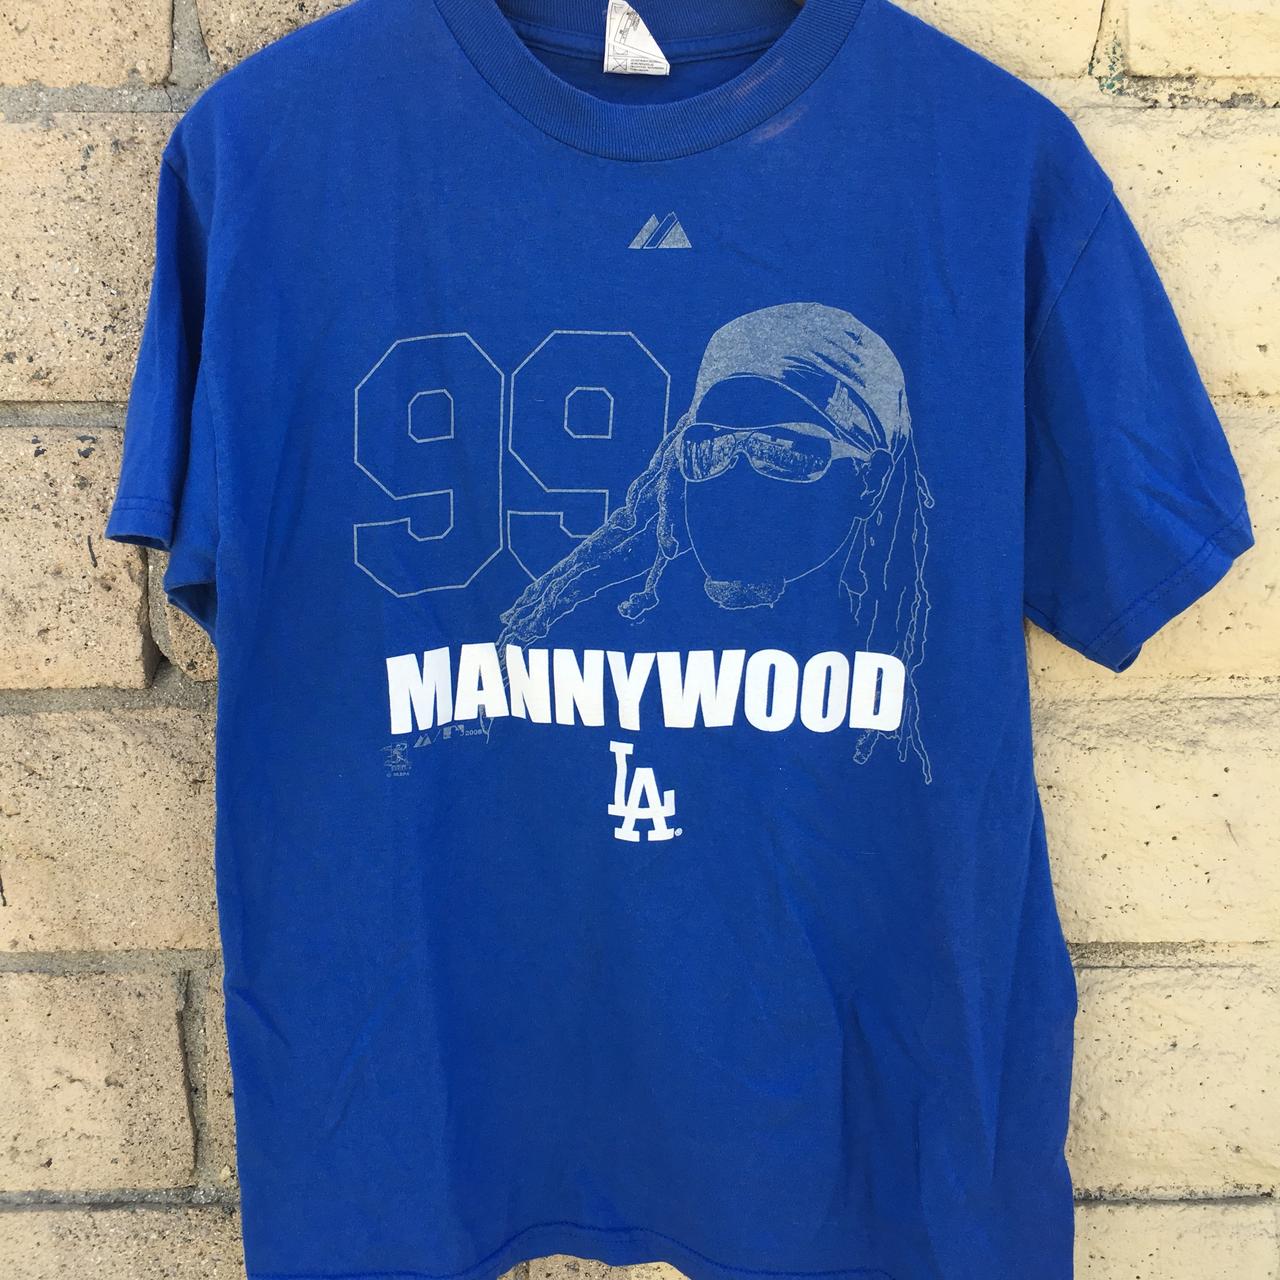 So What Will The Dodgers Do with Those Mannywood T-Shirts?